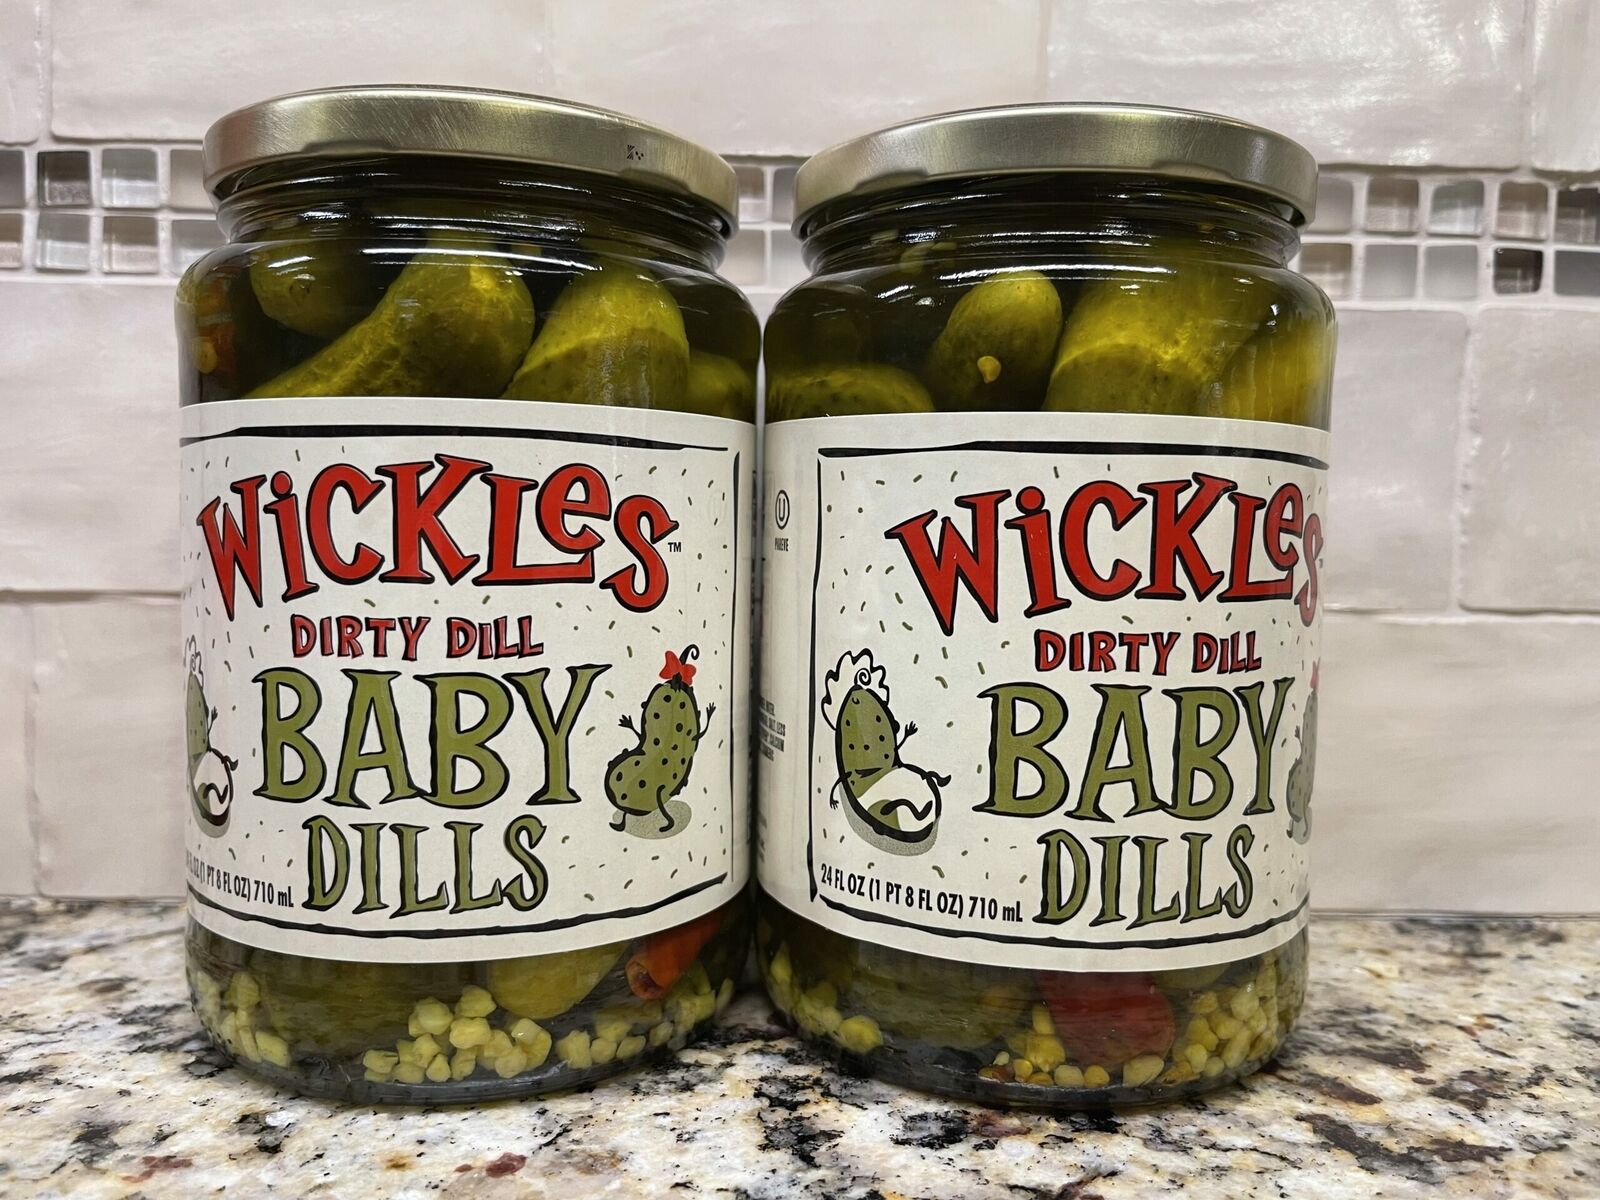 Are Wickles dirty dill pickles spicy?